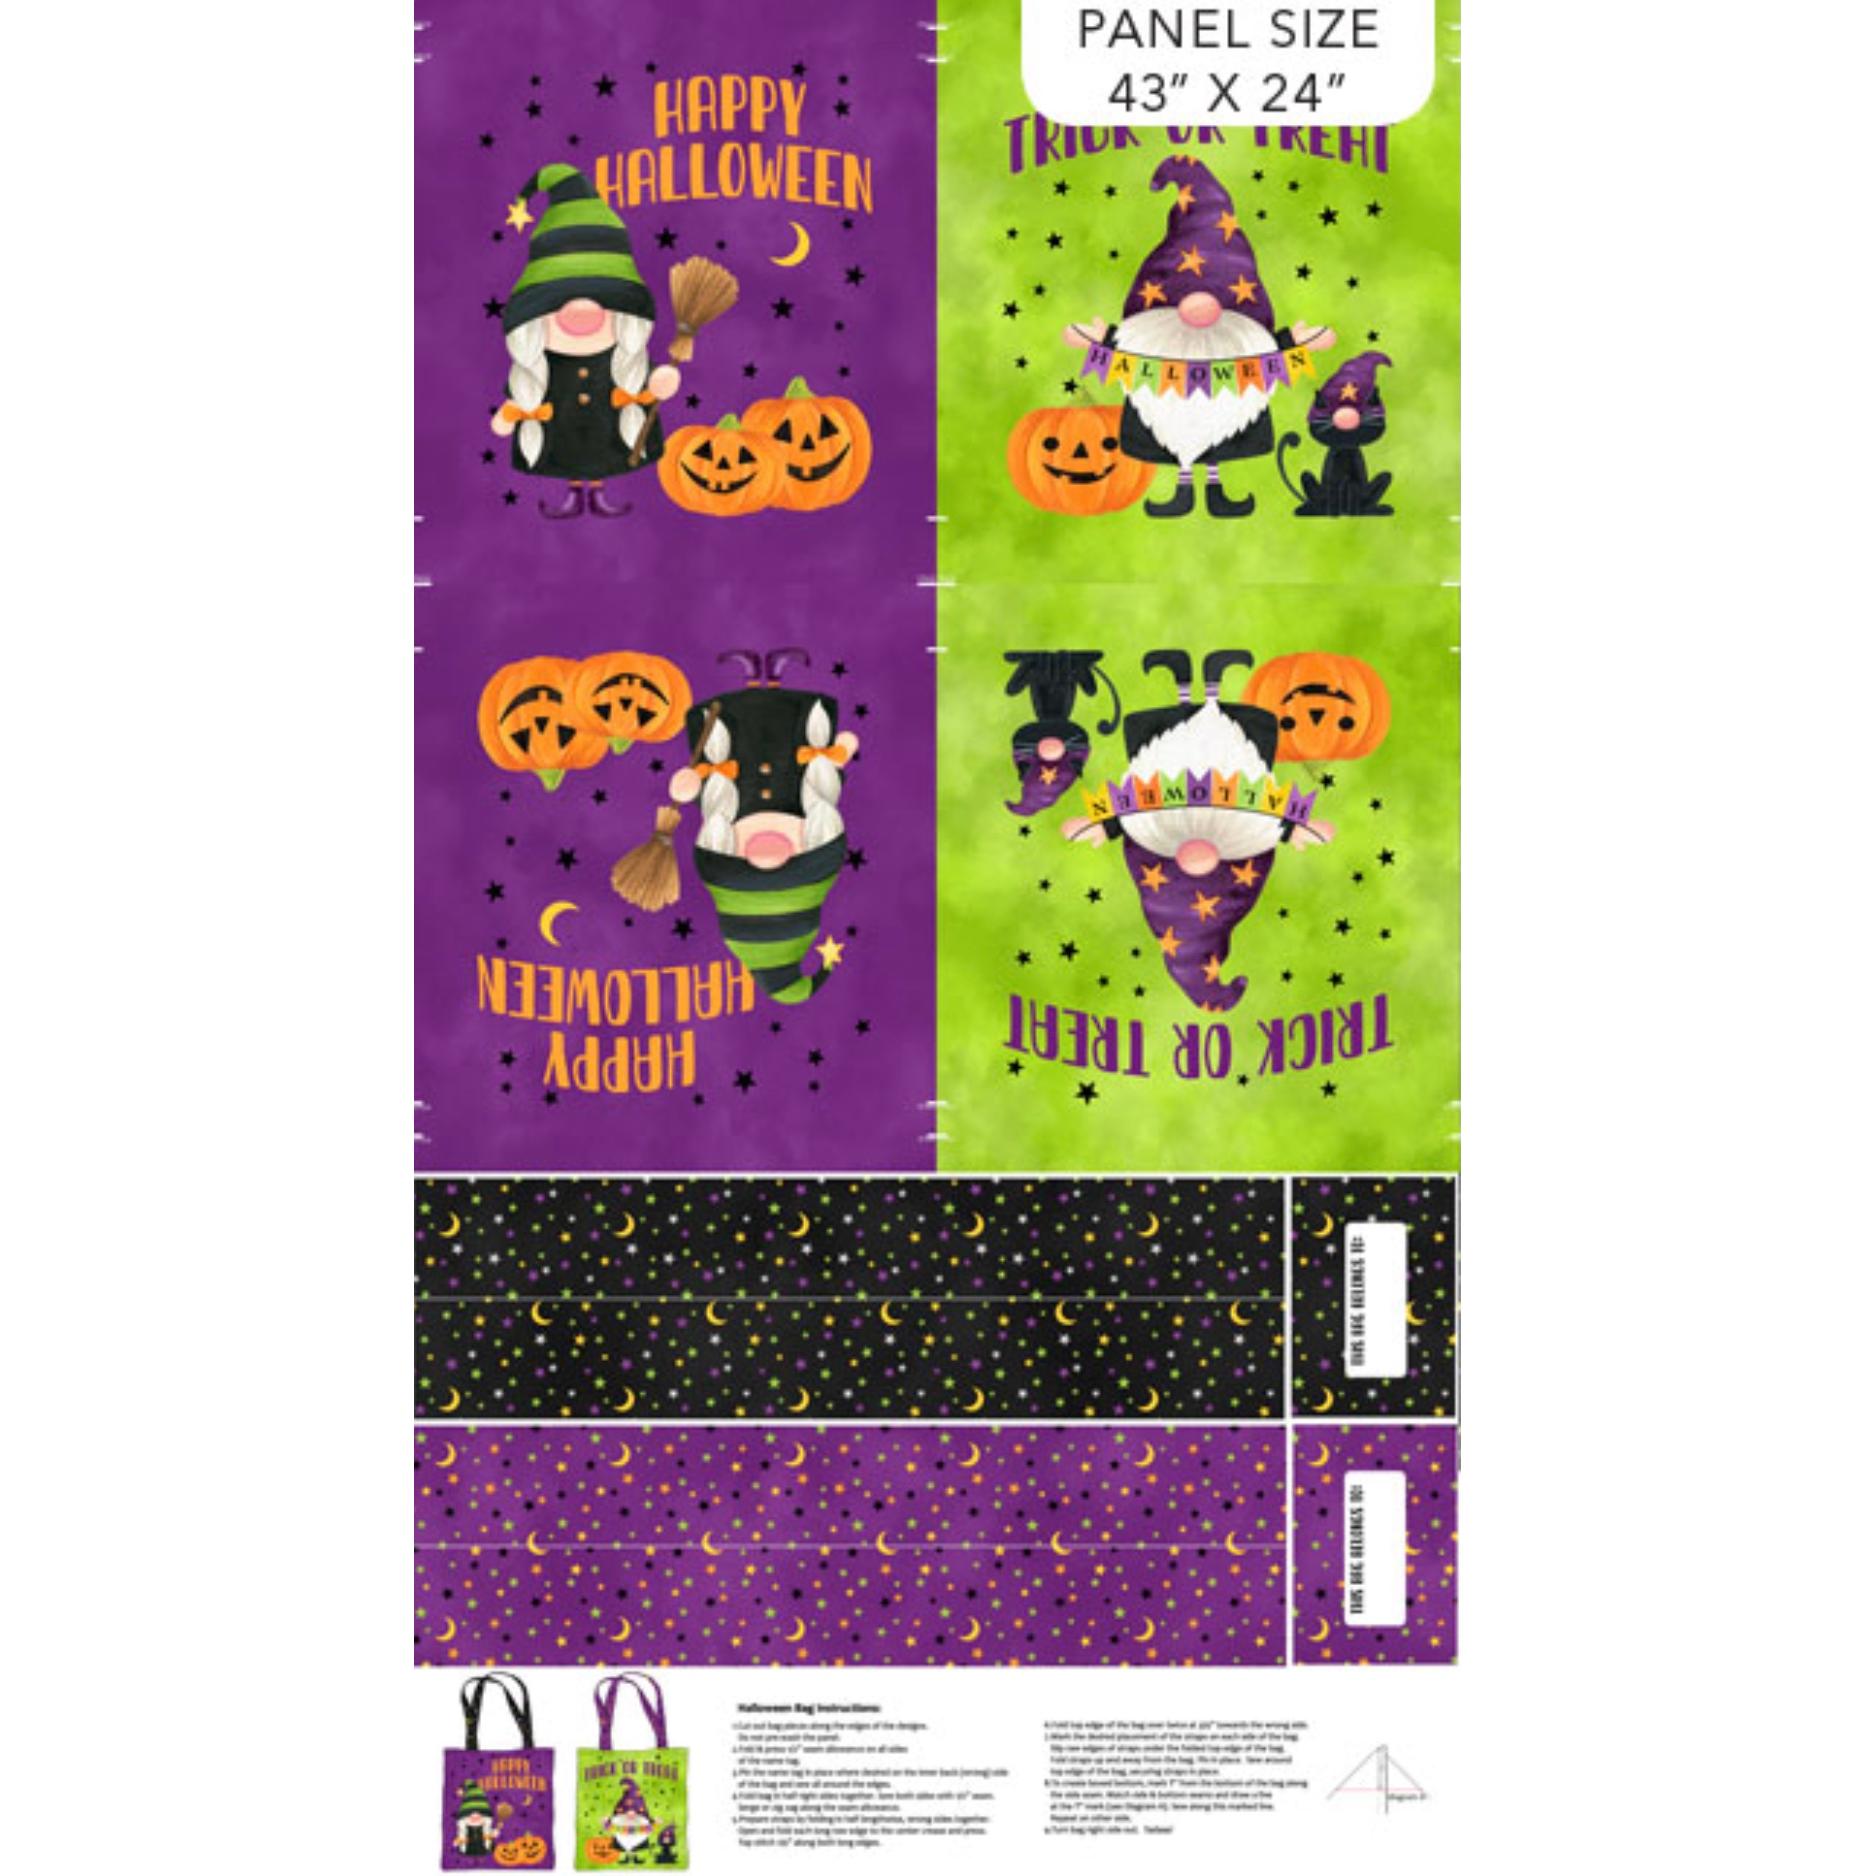 Gnomes Night Out Trick or Treat Bag Panel 24"x 43/44"